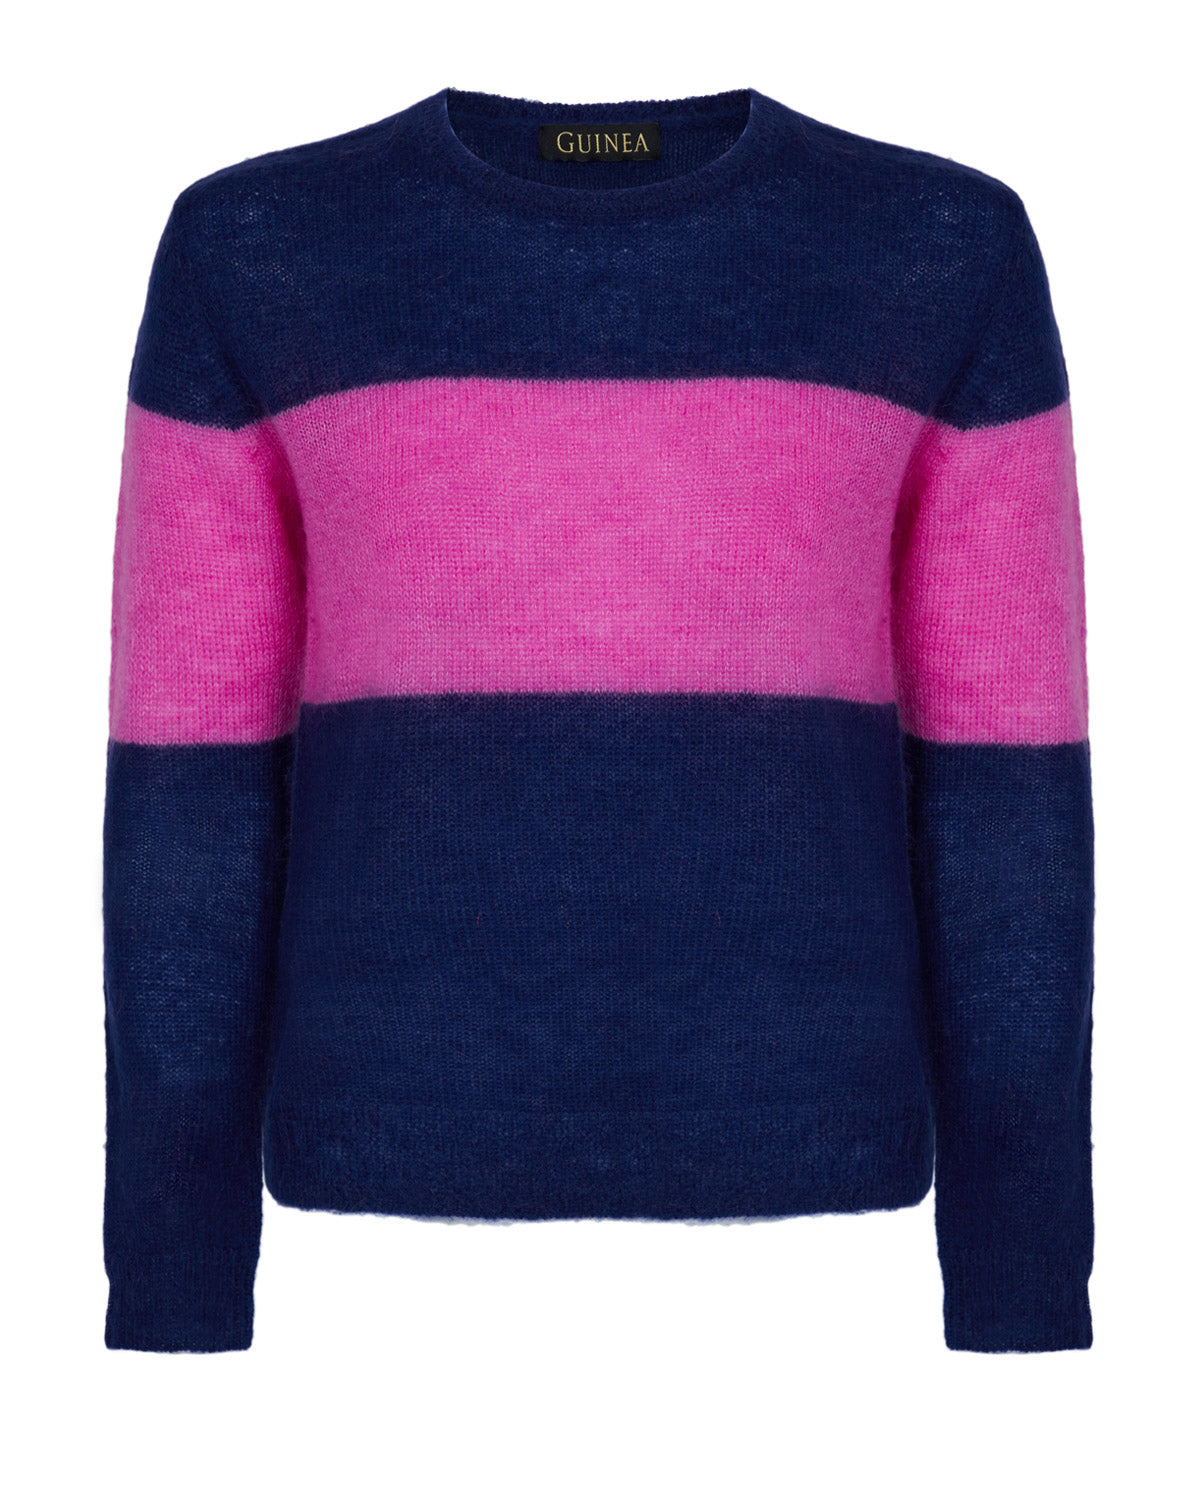 Navy jumper with pink stripe in a wool and mohair blend. It has a relaxed fit and crew neck.